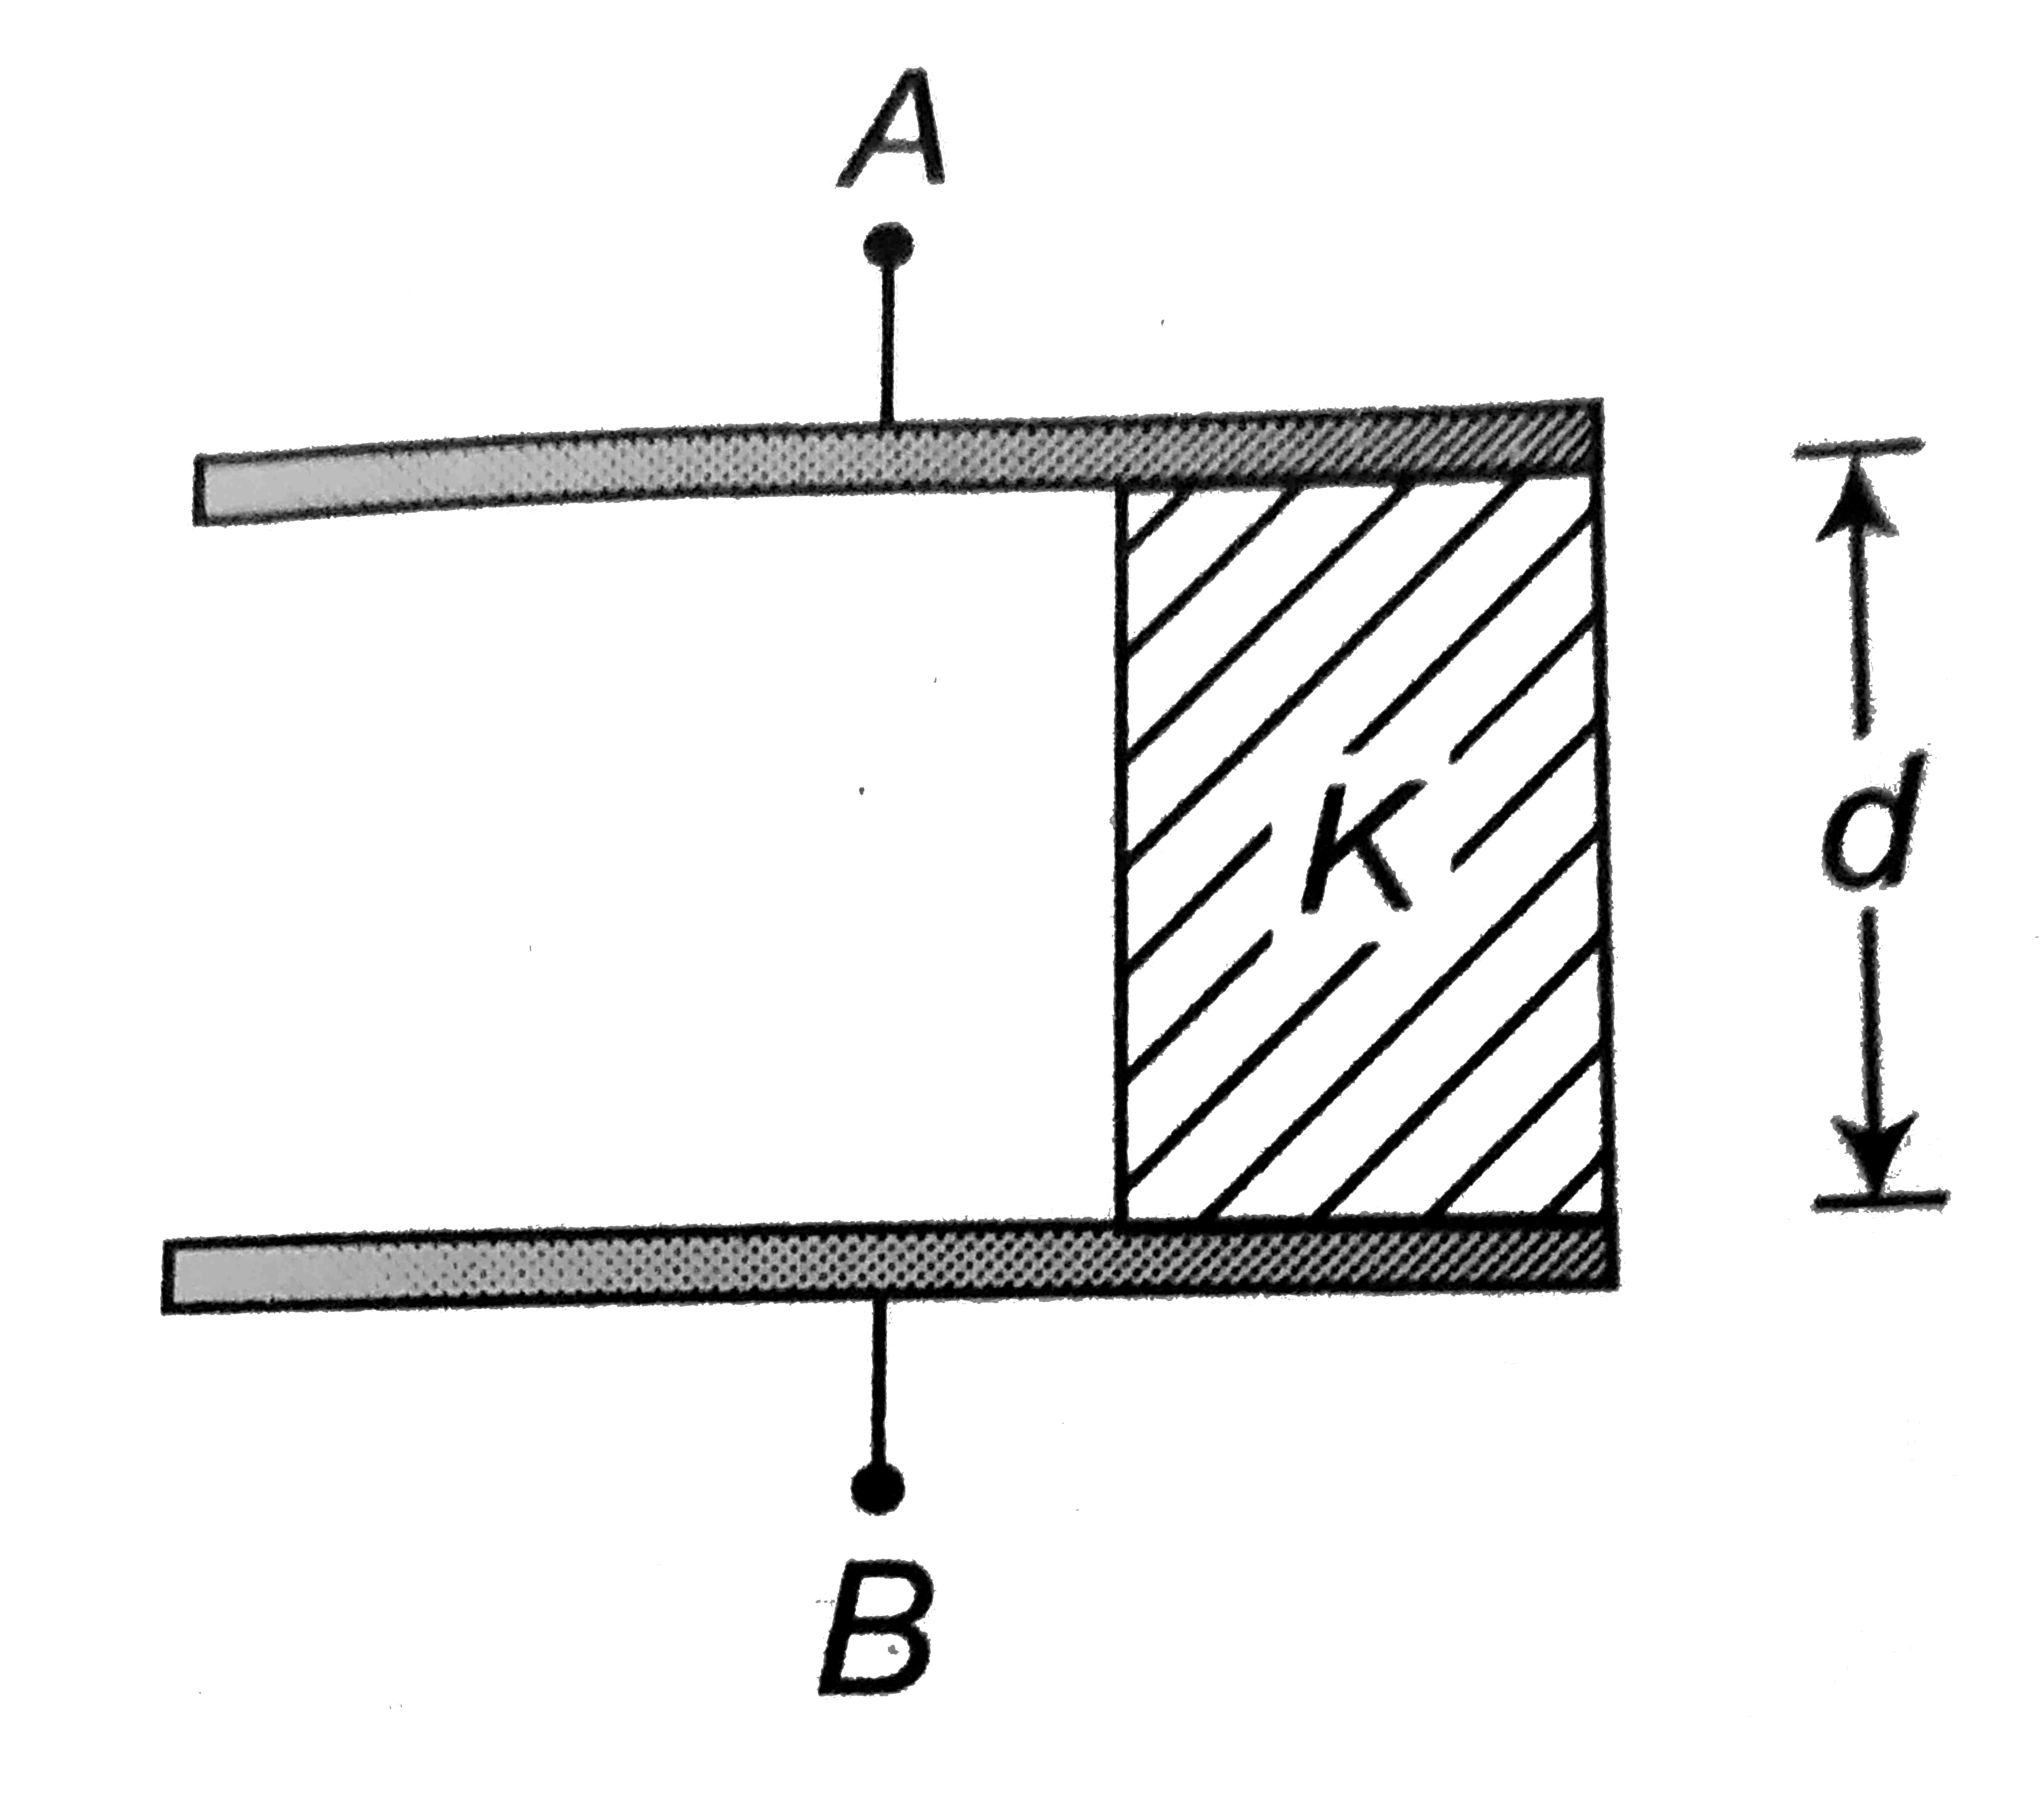 A parallel plate capacitor with vacuum between its plates has capacitance C. A slabe of dielectric constant K and having the same thickness as the separation between the plates is introduced so as to fill 1//3^(rd) of the capacitor as shown in the figure. the new capacitance will be